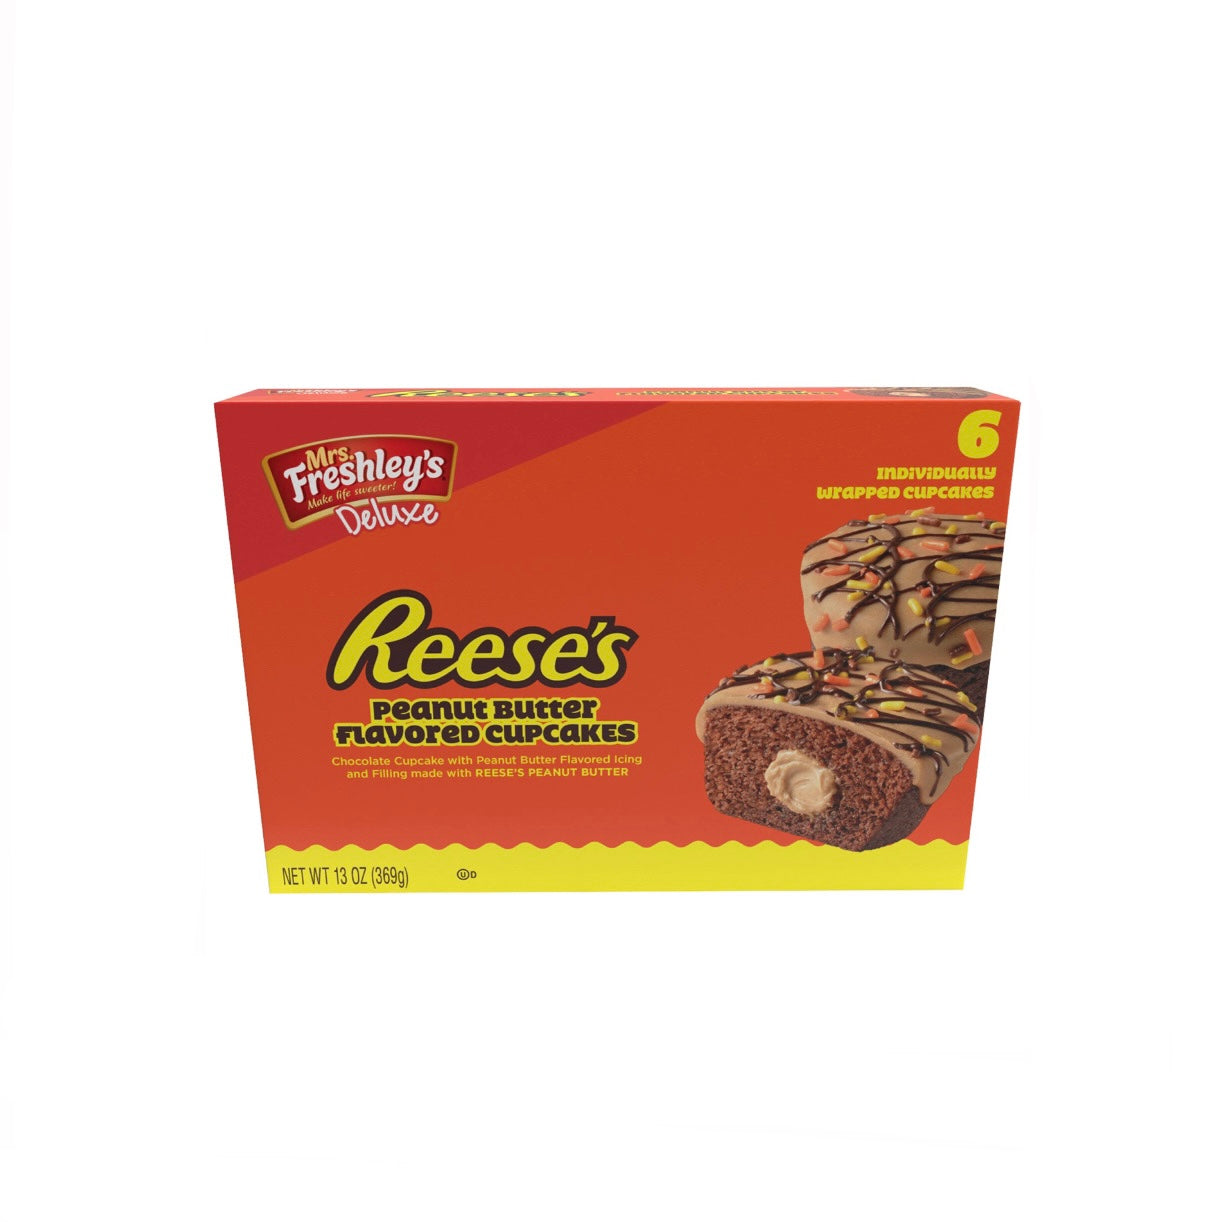 Mrs. Freshley's Reeses Peanut Butter Flavored Cupcakes ( 5006000/897611 )